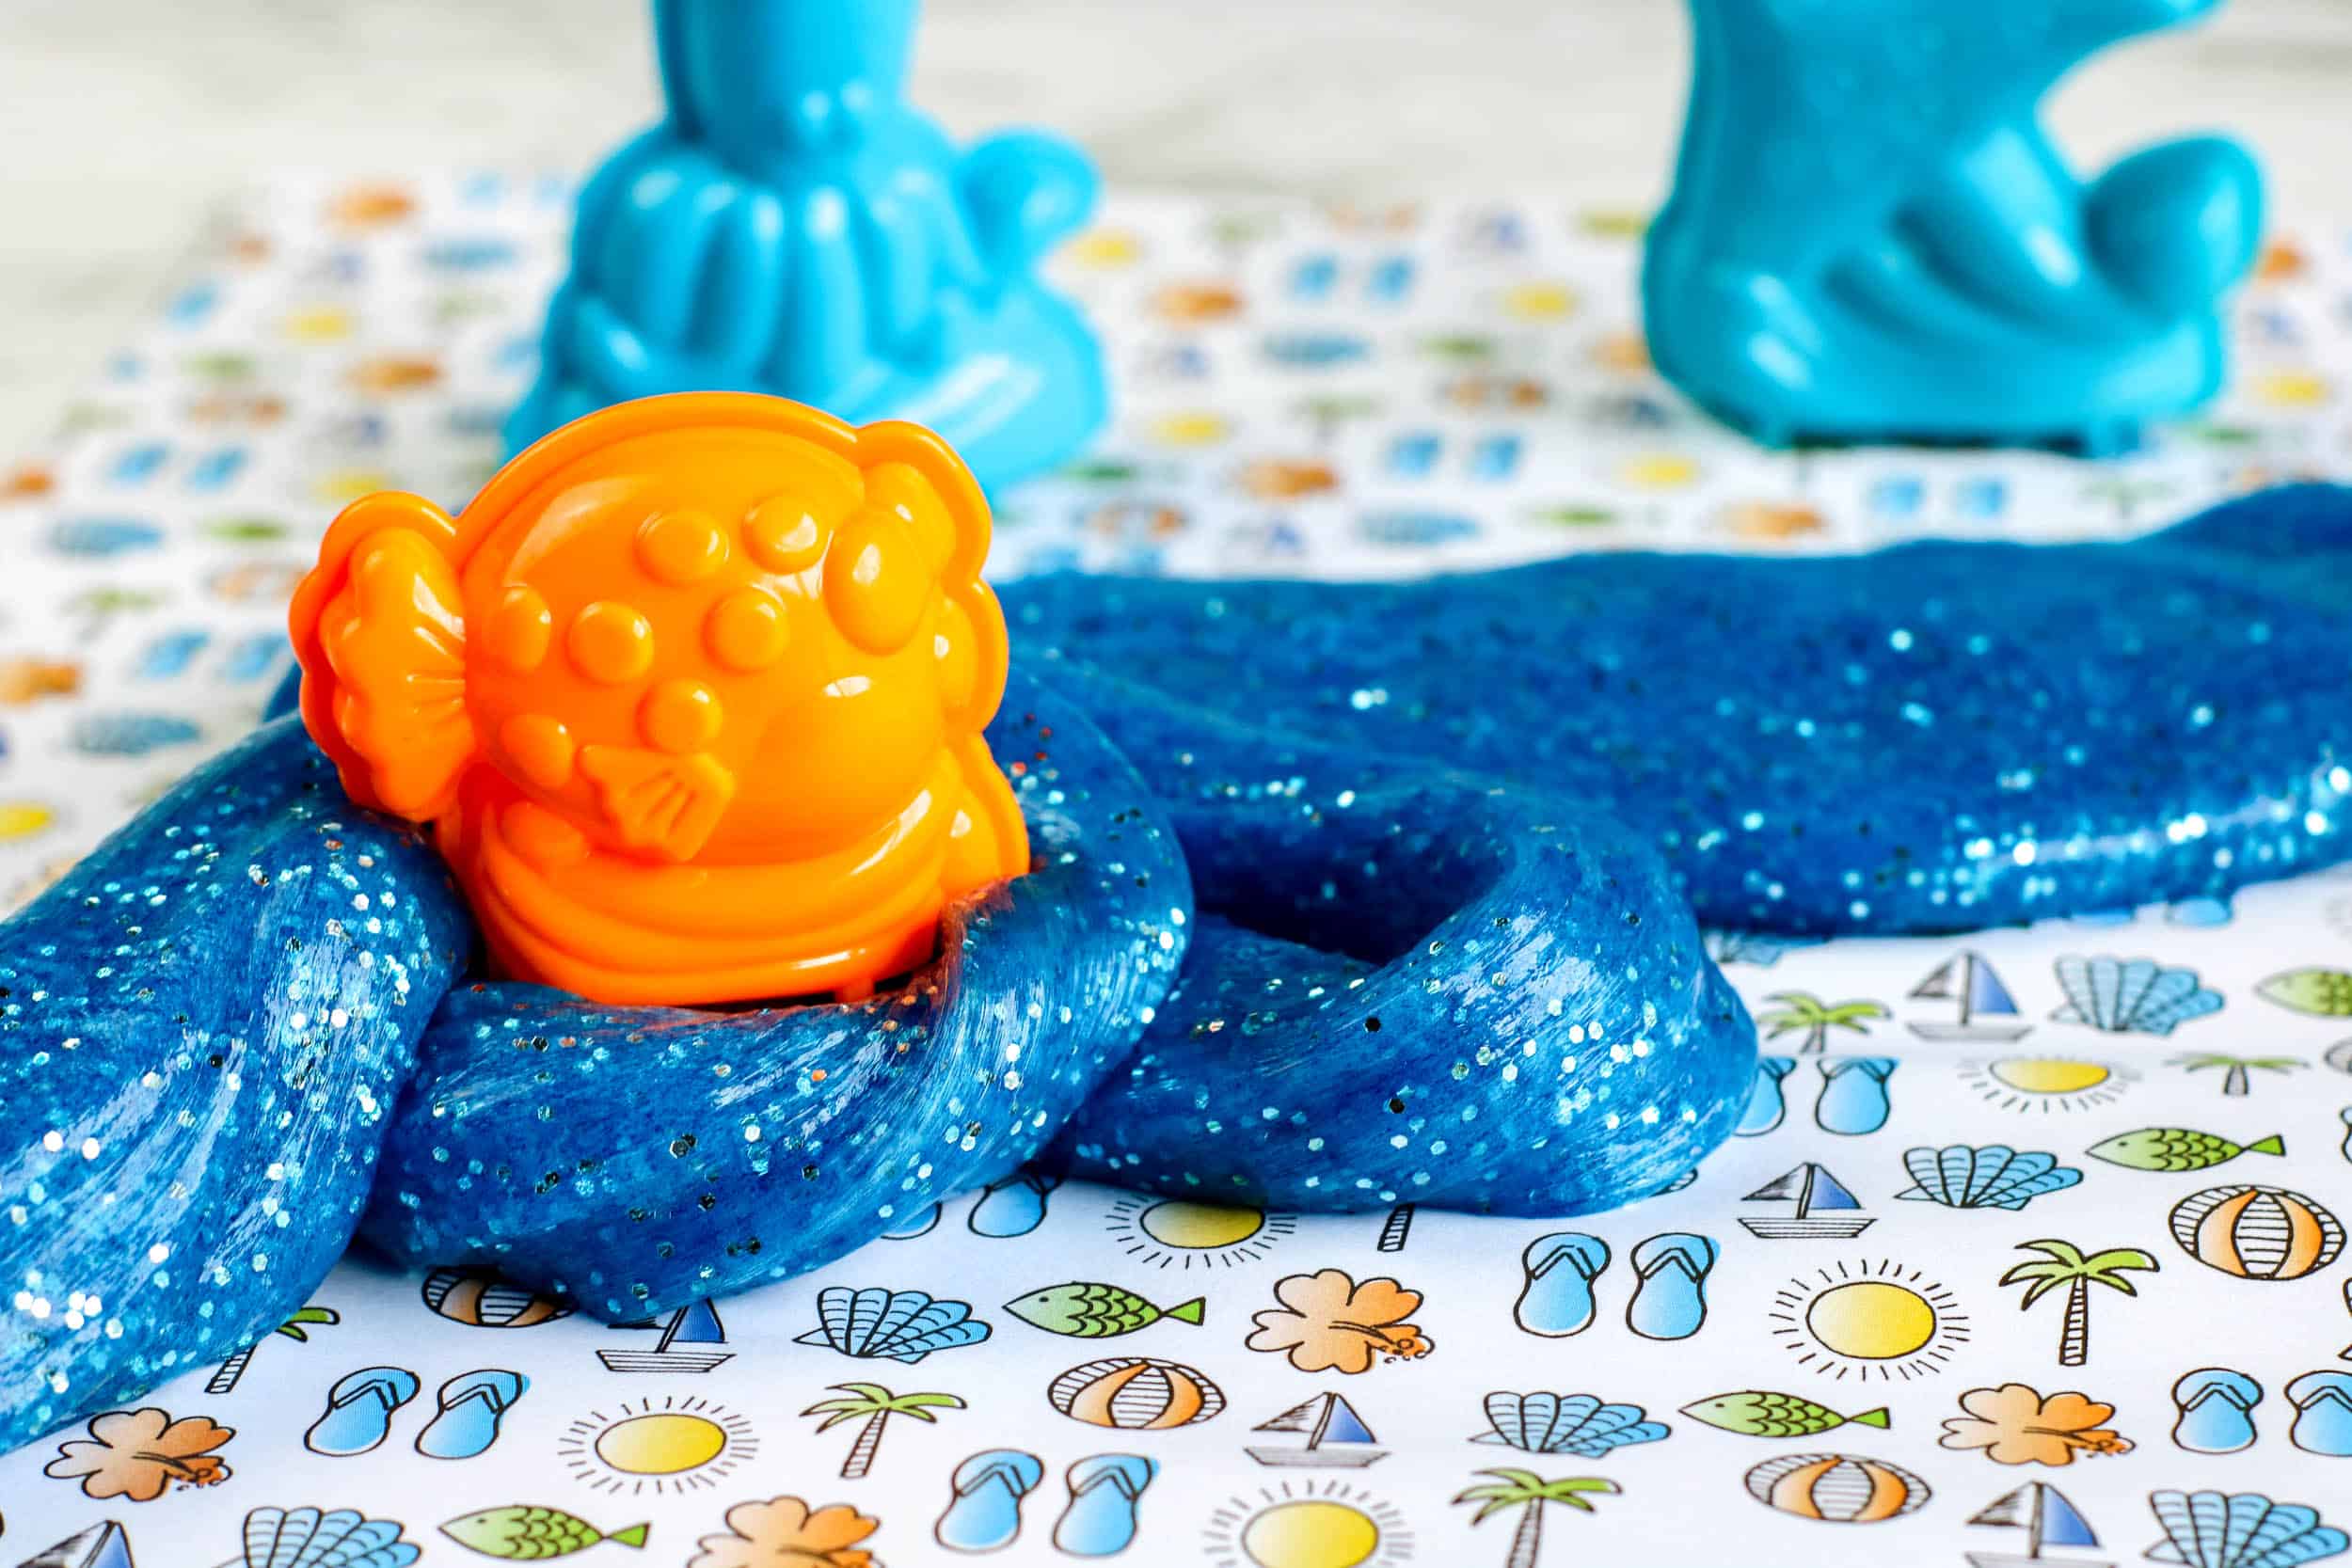 This sparkly blue ocean slime is so satisfying to make and look at! Here's how to make it with just 6 ingredients.